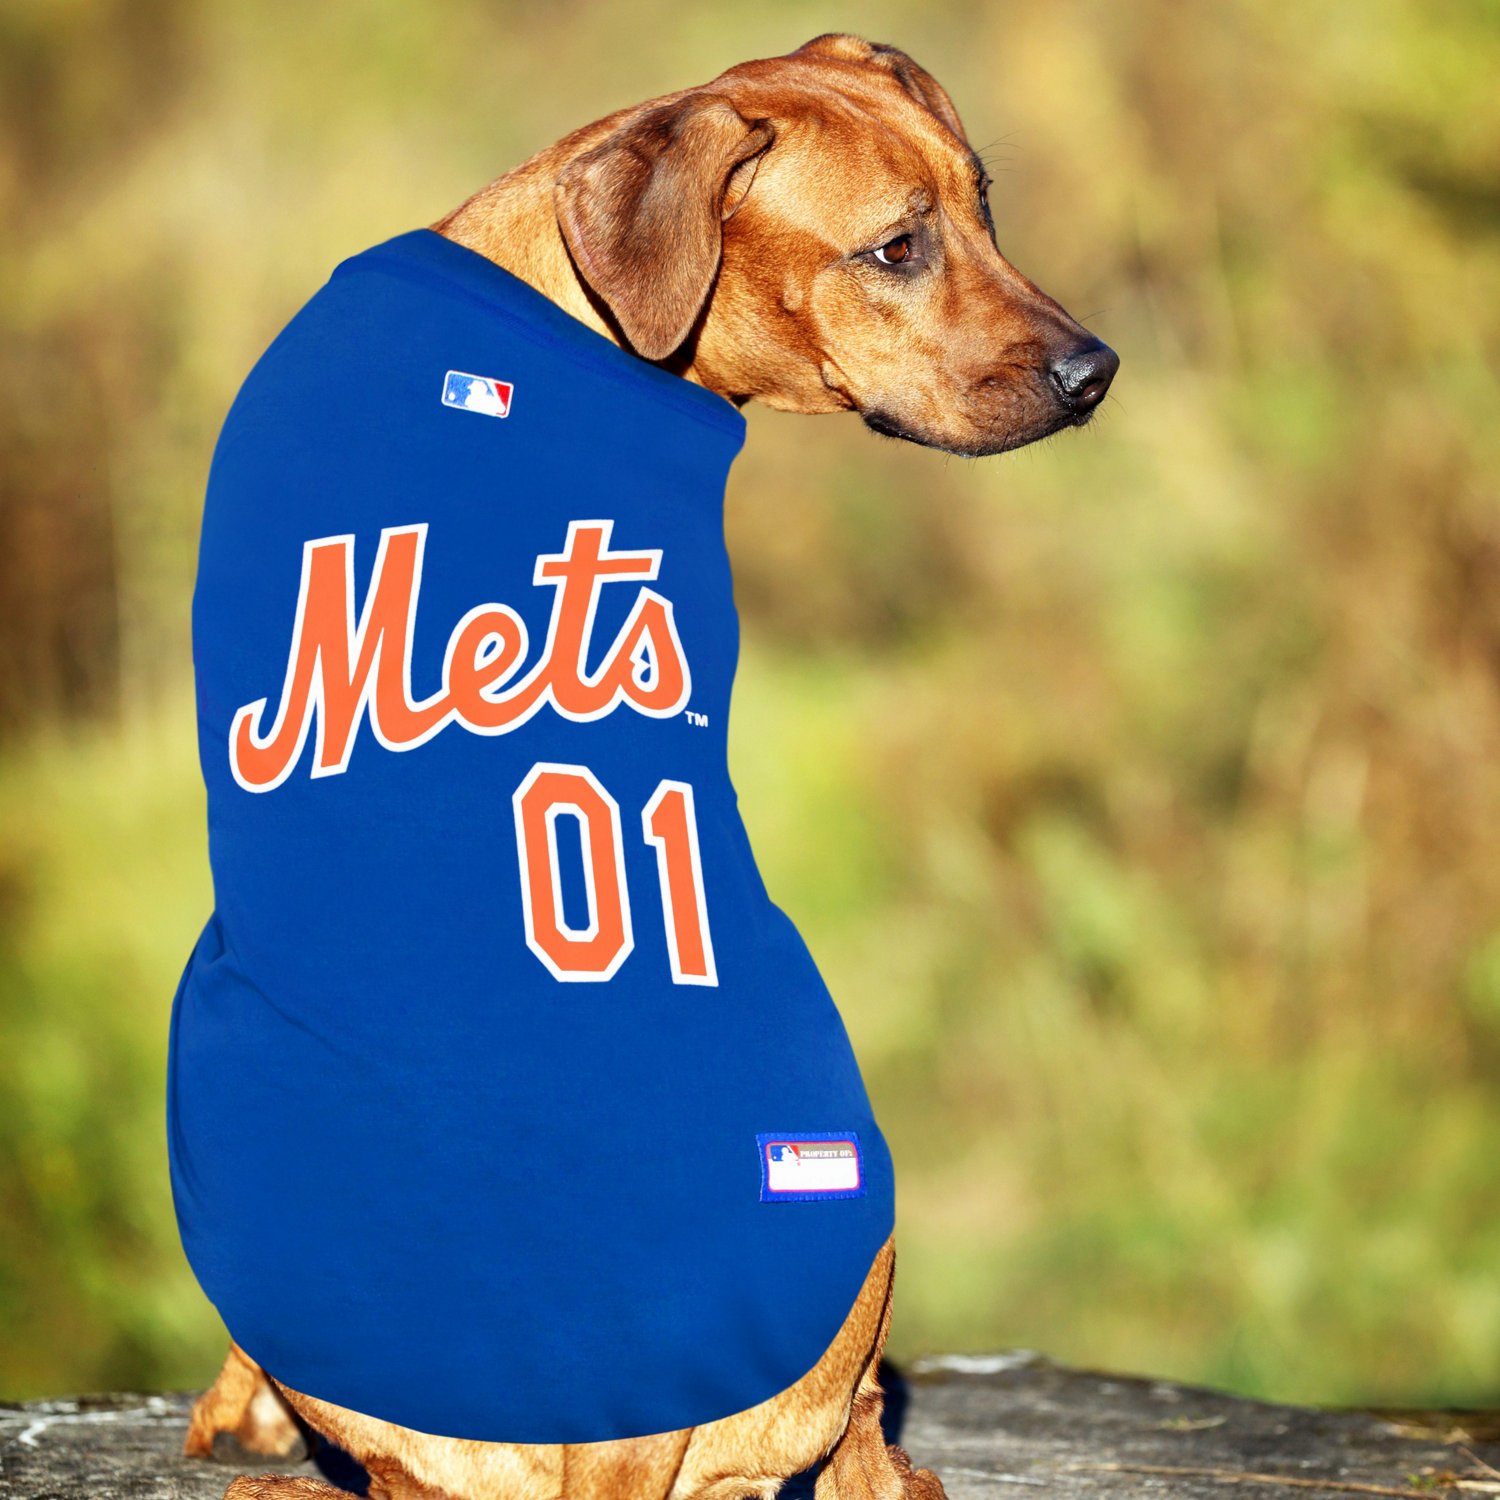 Pets First MLB Los Angeles Dodgers Mesh Jersey for Dogs and Cats